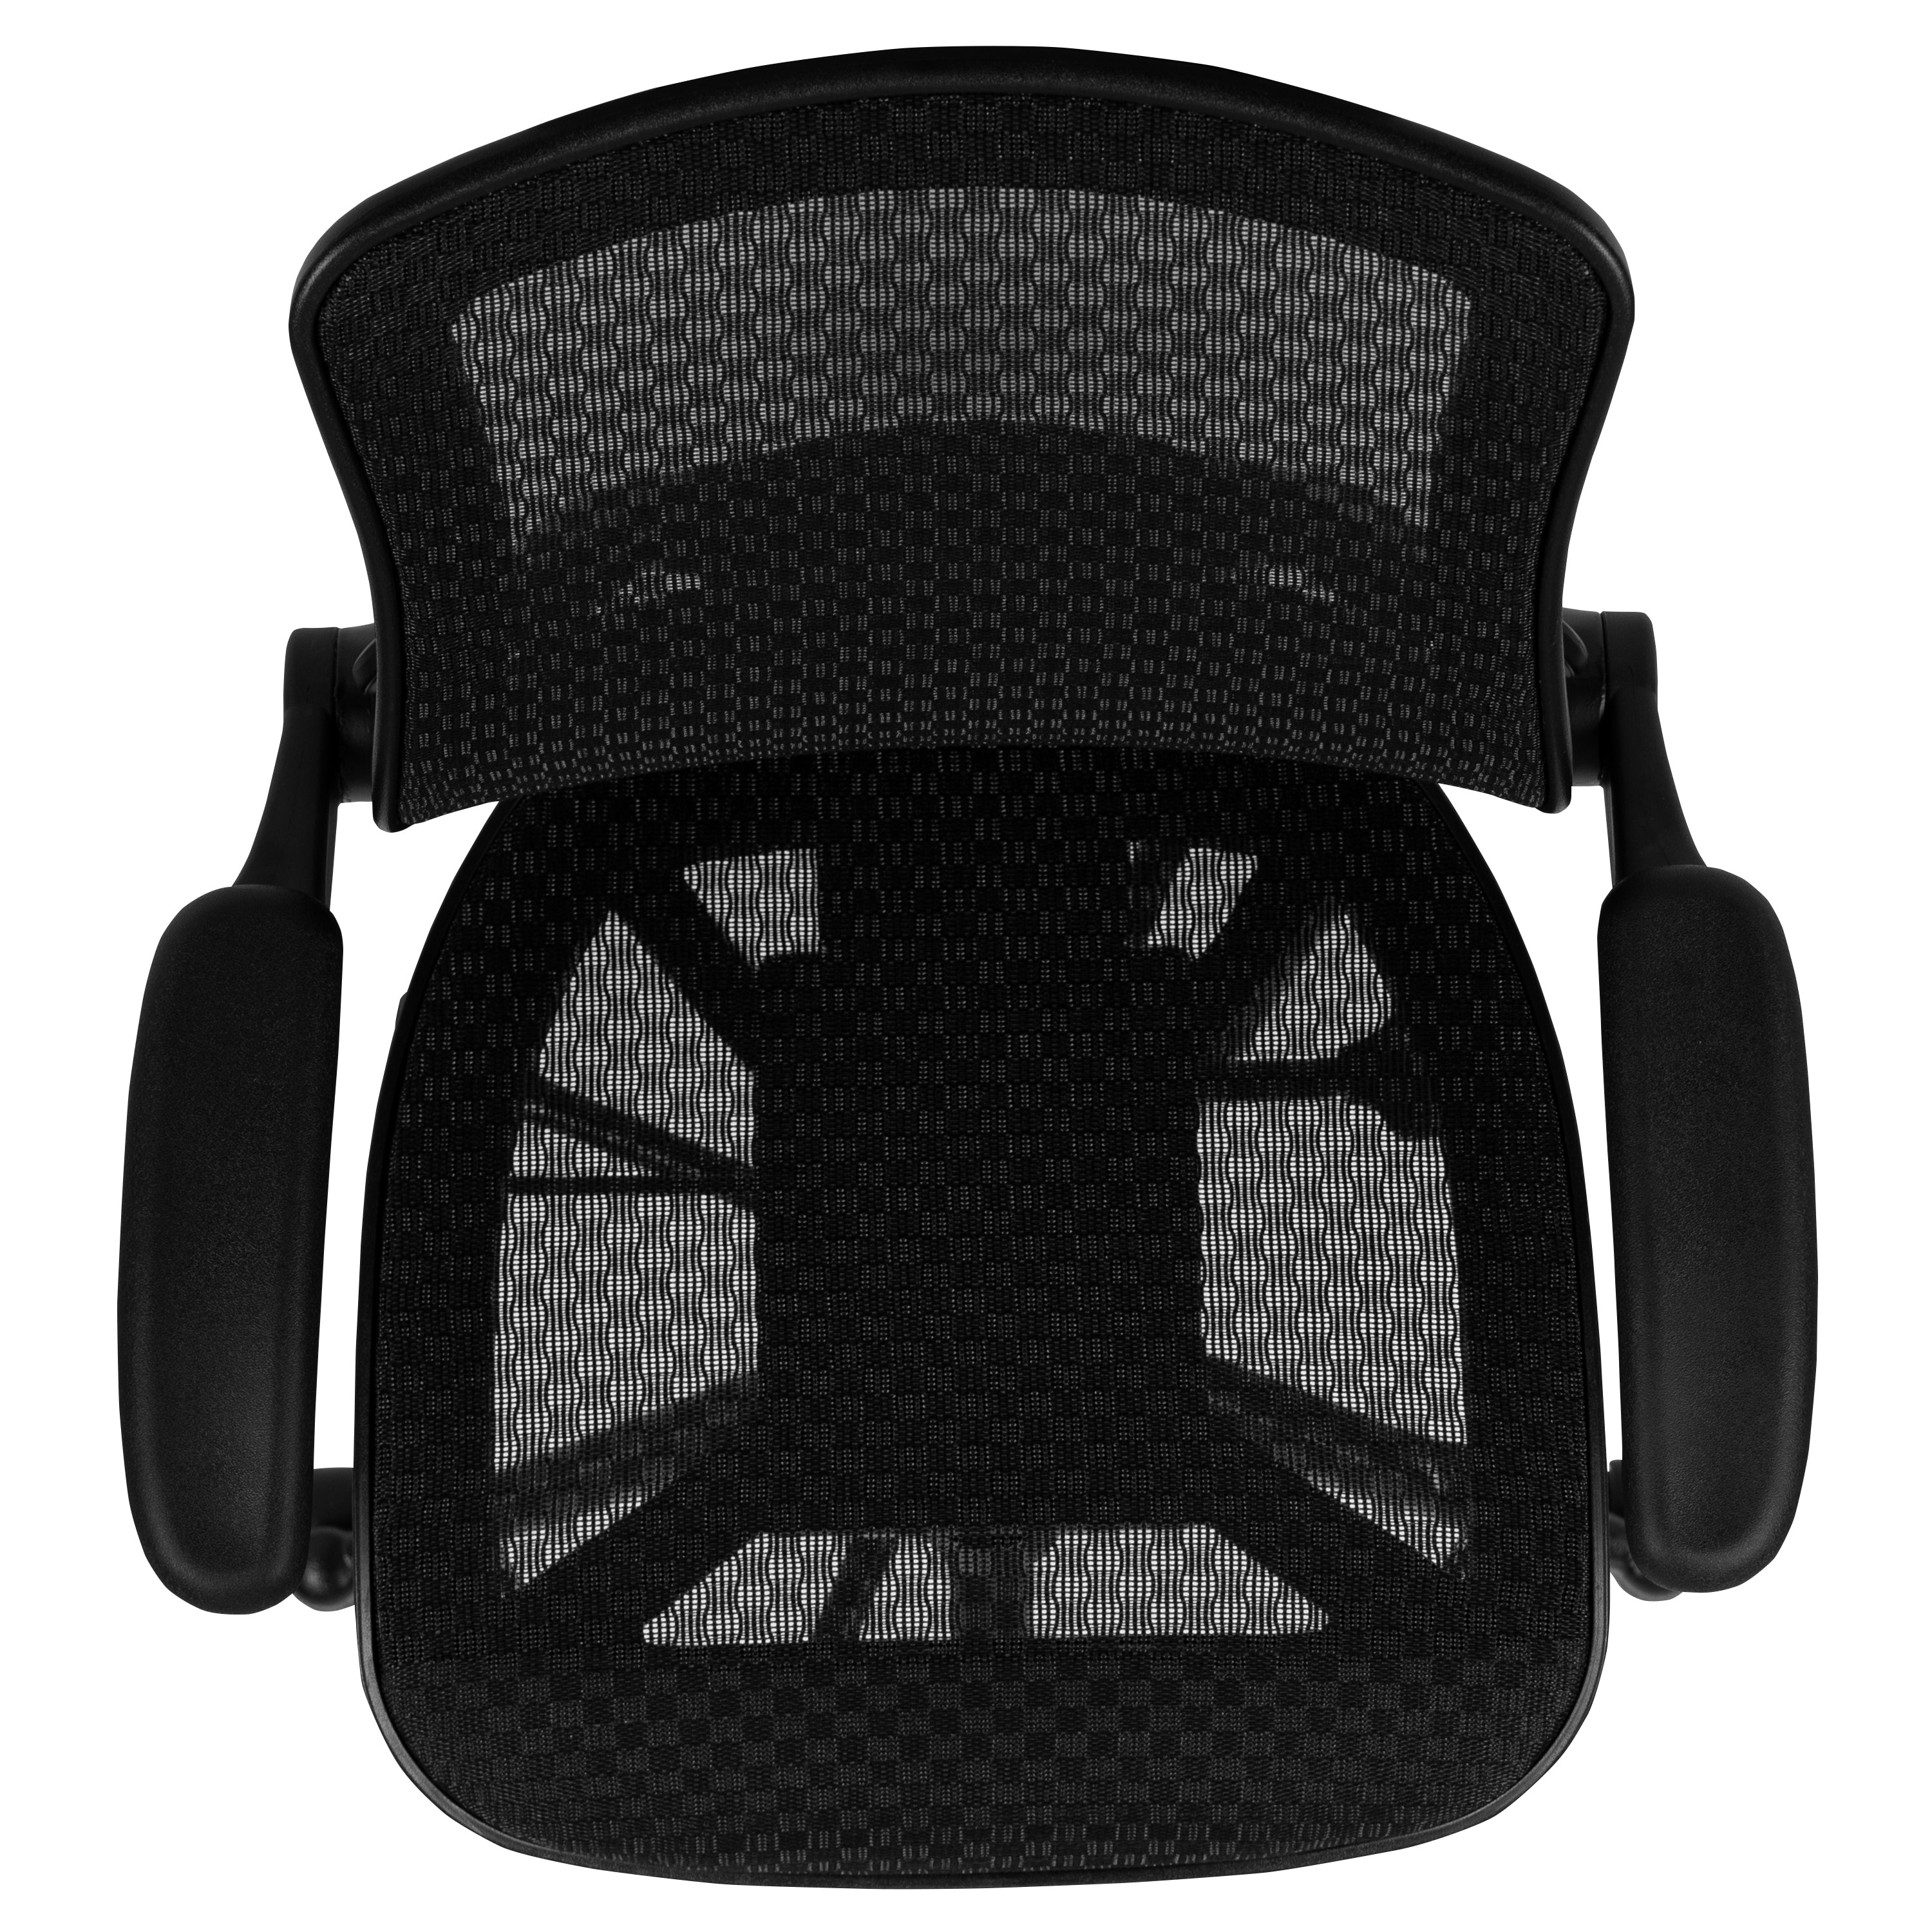 Mid-Back Transparent Mesh Drafting Chair with Flip-Up Arms-Desk Chair-Flash Furniture-Wall2Wall Furnishings